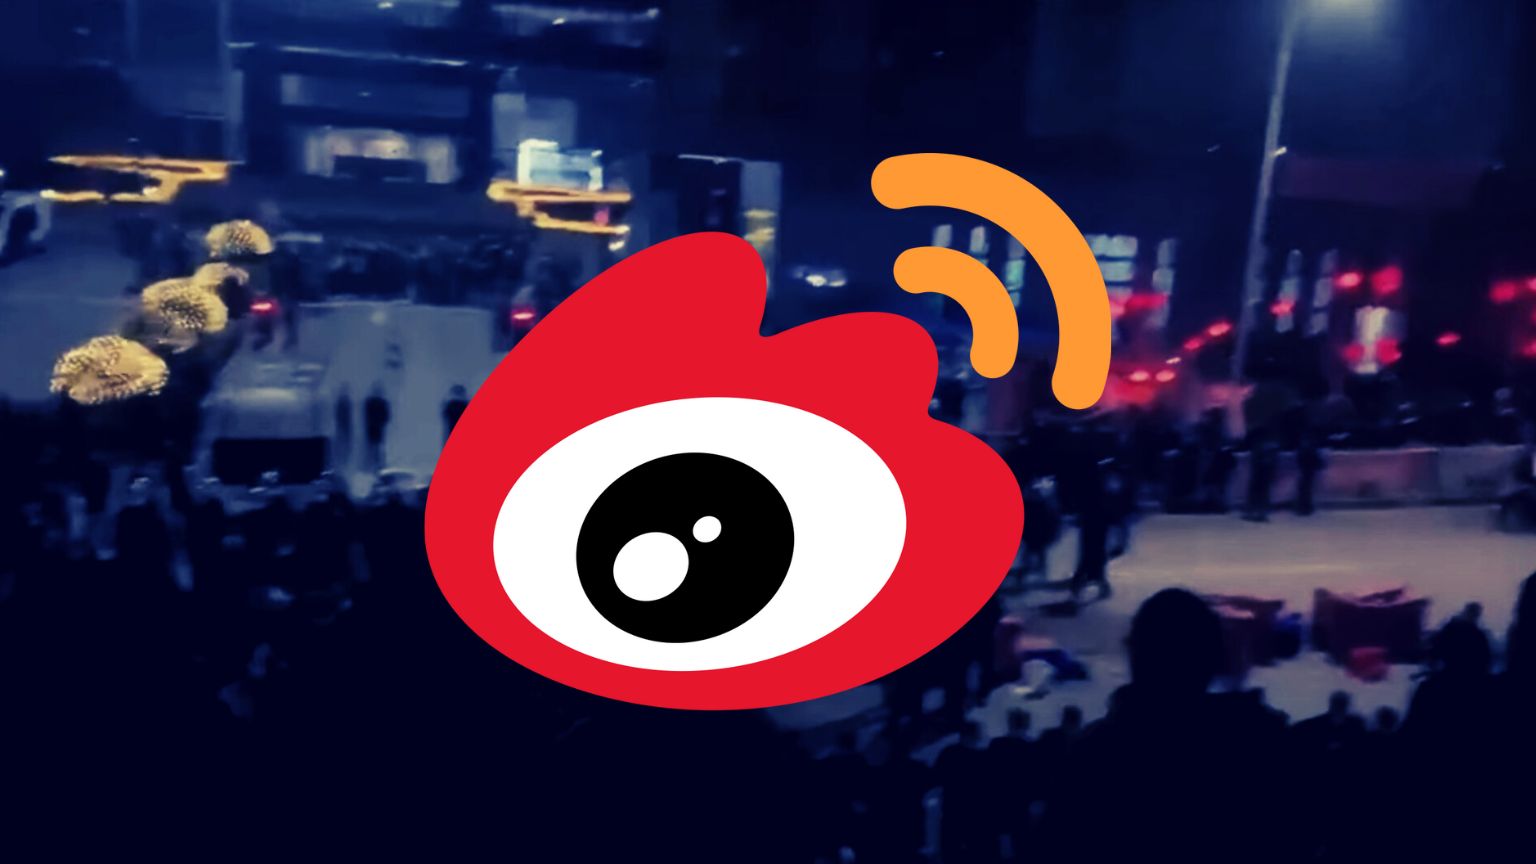 China’s Weibo bans more accounts for Covid policy criticism